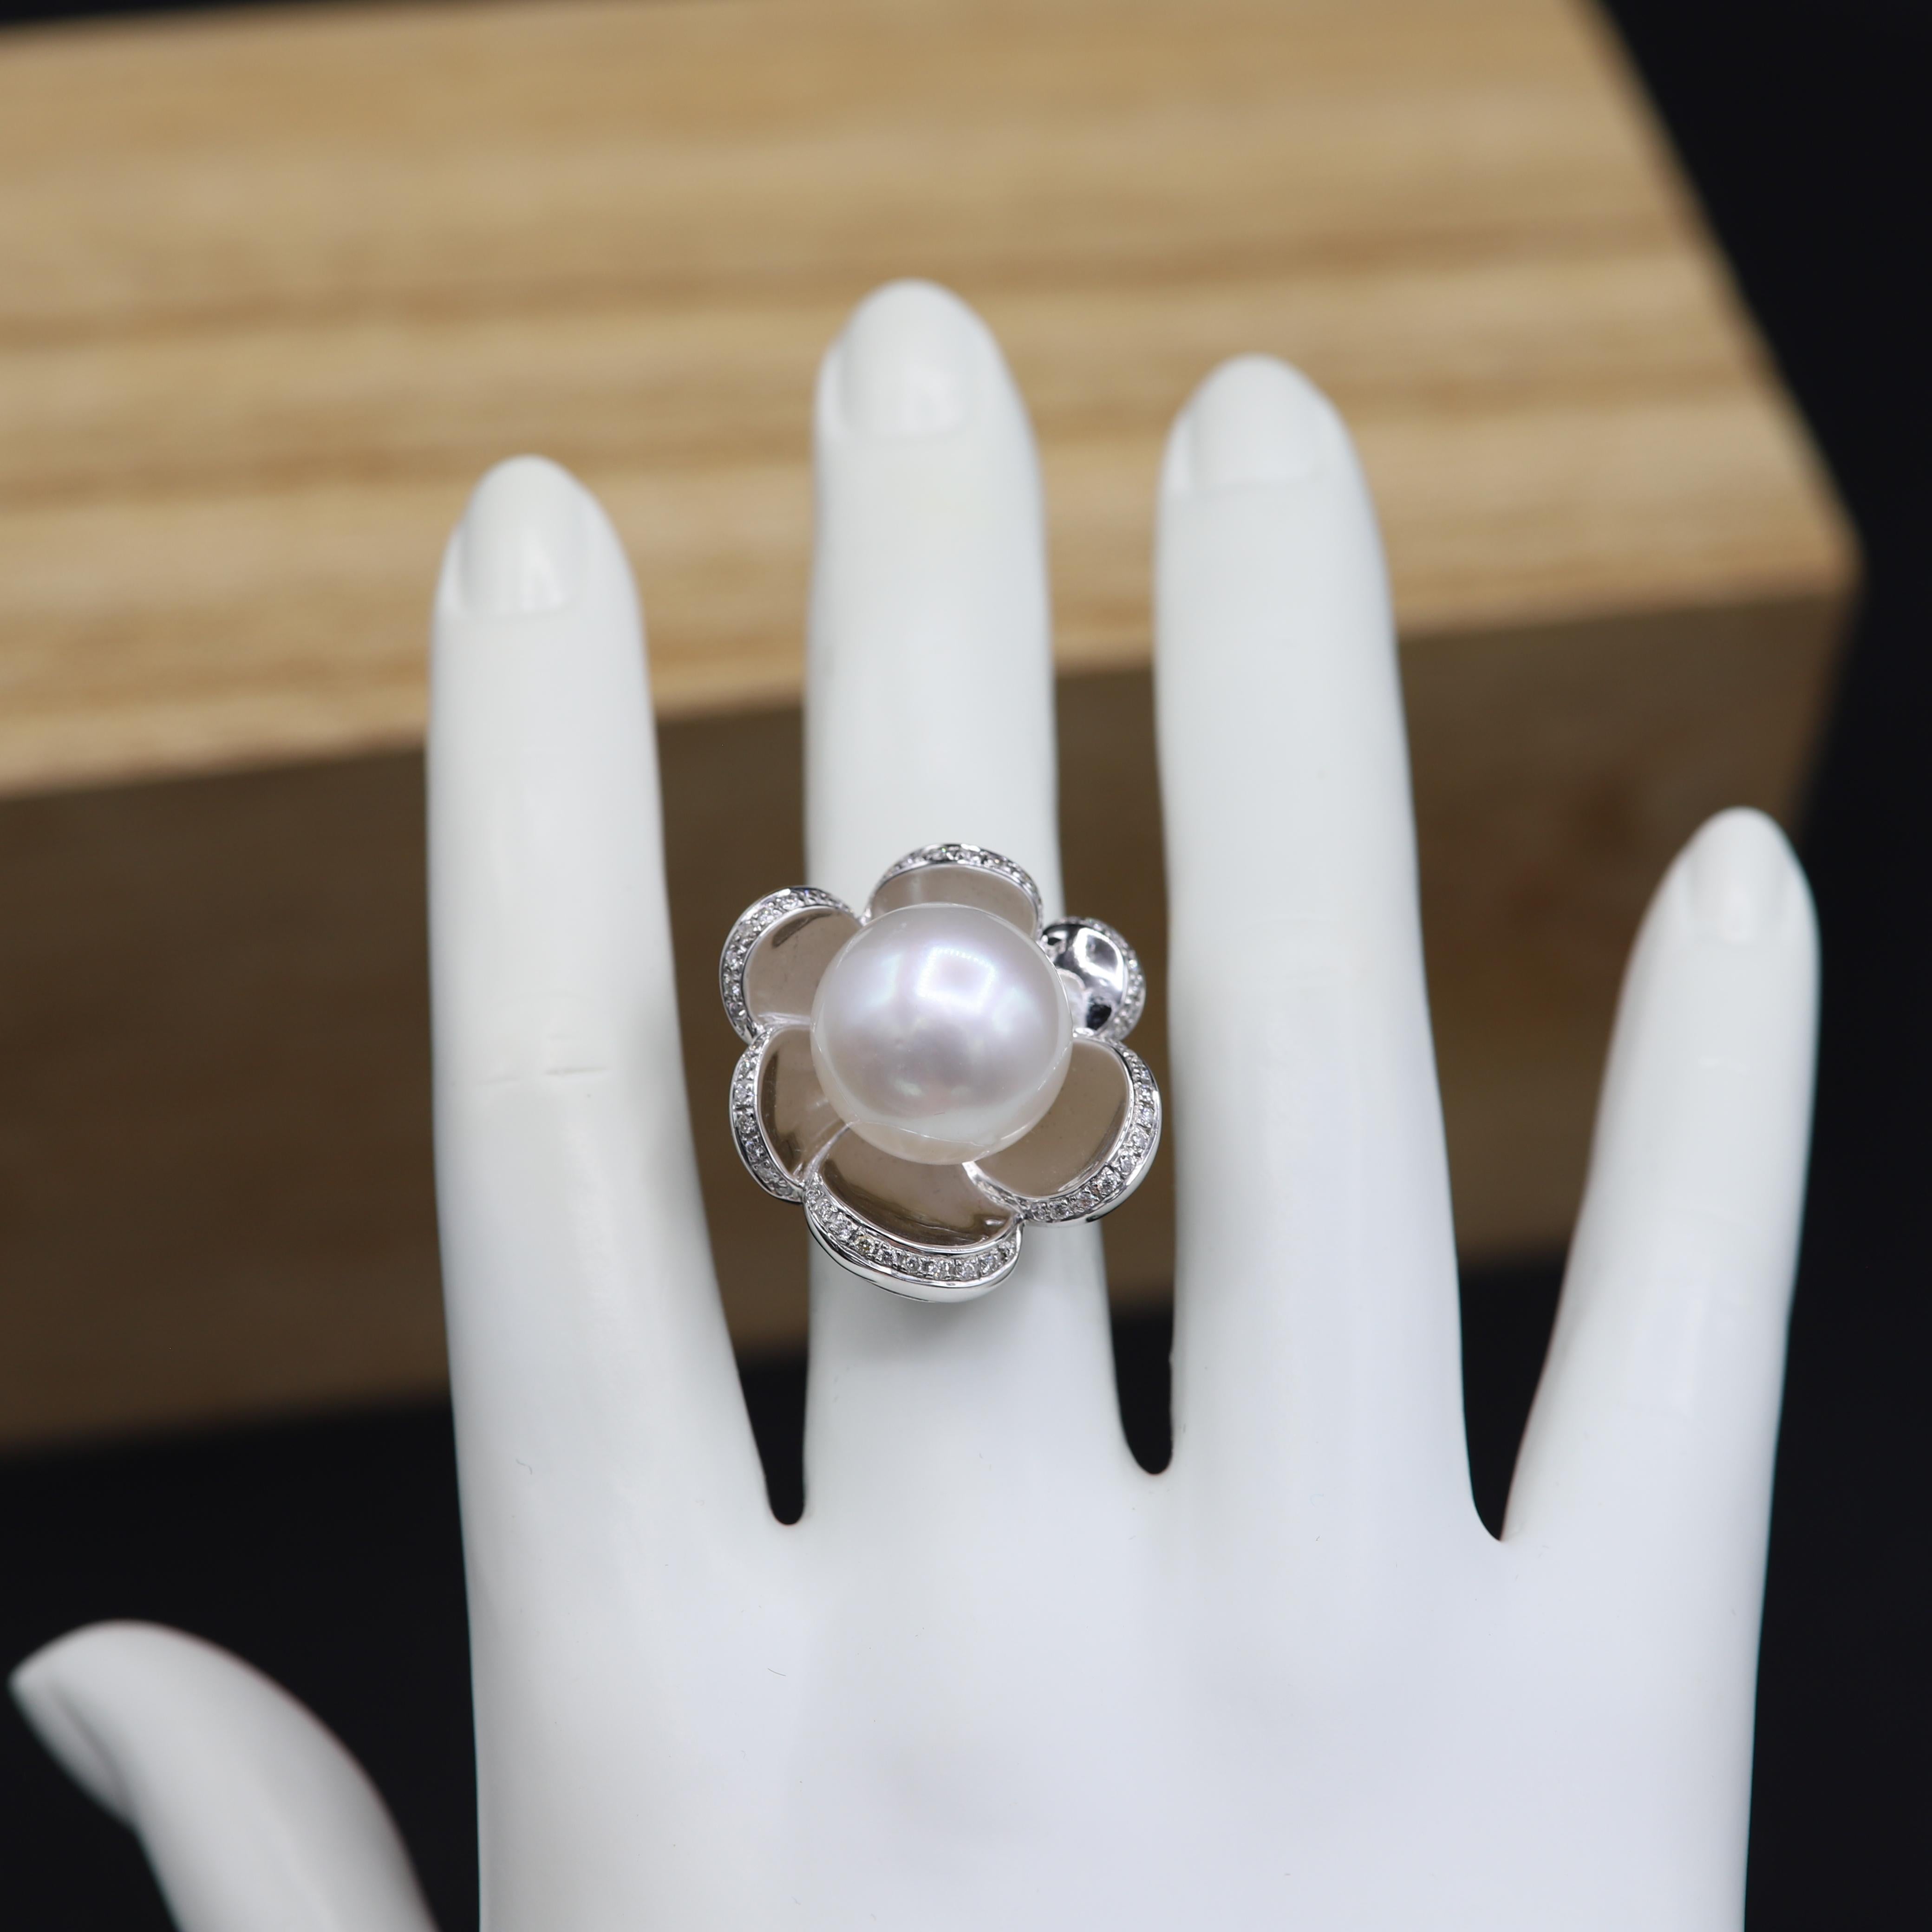 South Sea Pearl Flower Gold Ring 18 Karat White Gold & Diamonds Pearl For Sale 2